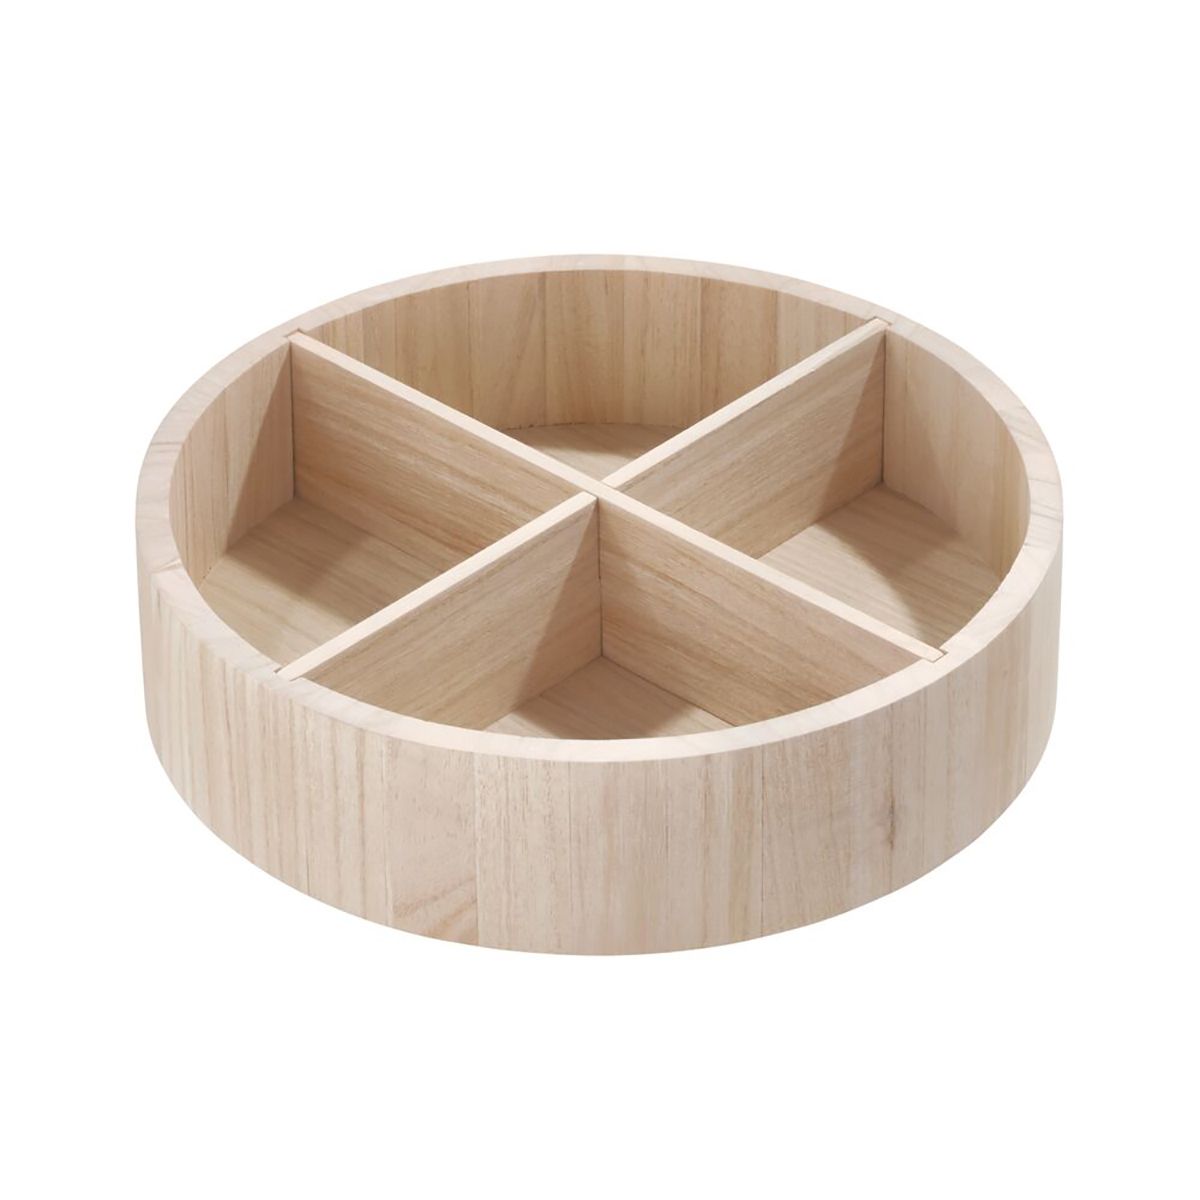 THE HOME EDIT Wooden Divided Turntable Sand | The Container Store